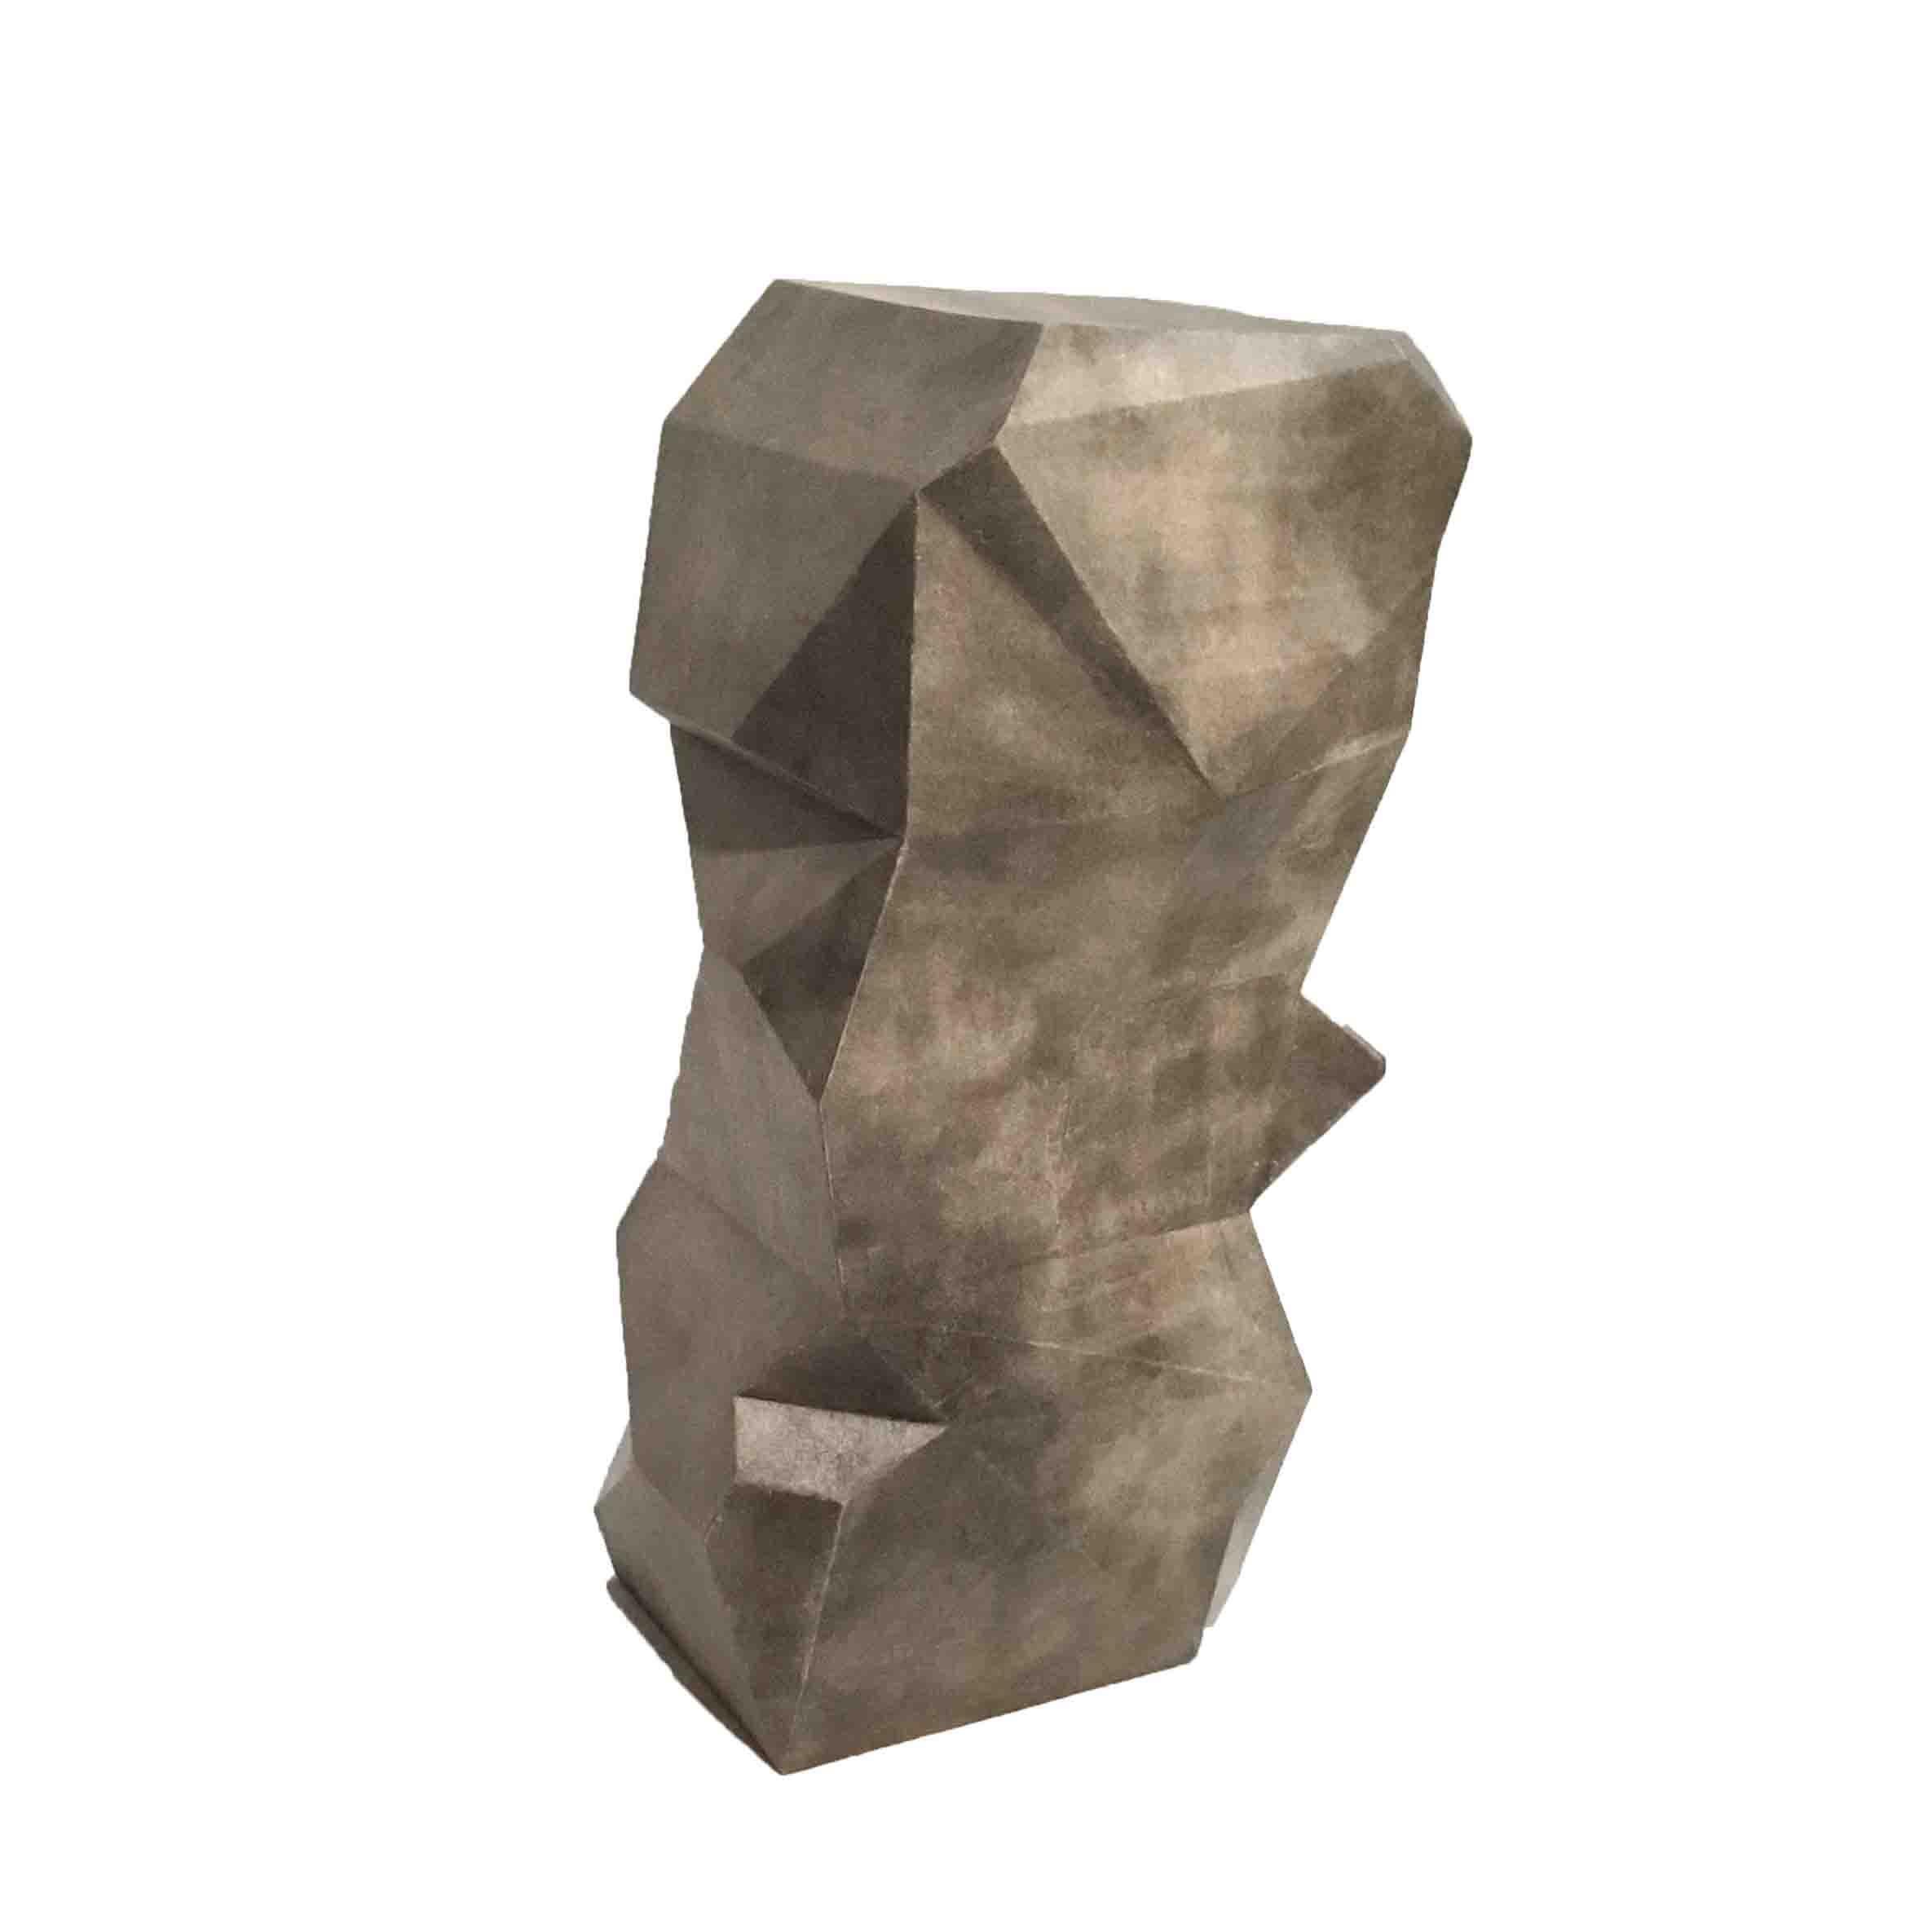 Mid-Century Modern Abstract Brutalist Pedestal Sculpture covered in light grey bark paper. Light weight and hollow. 

Focus on sculptural folds.
Measure: 48